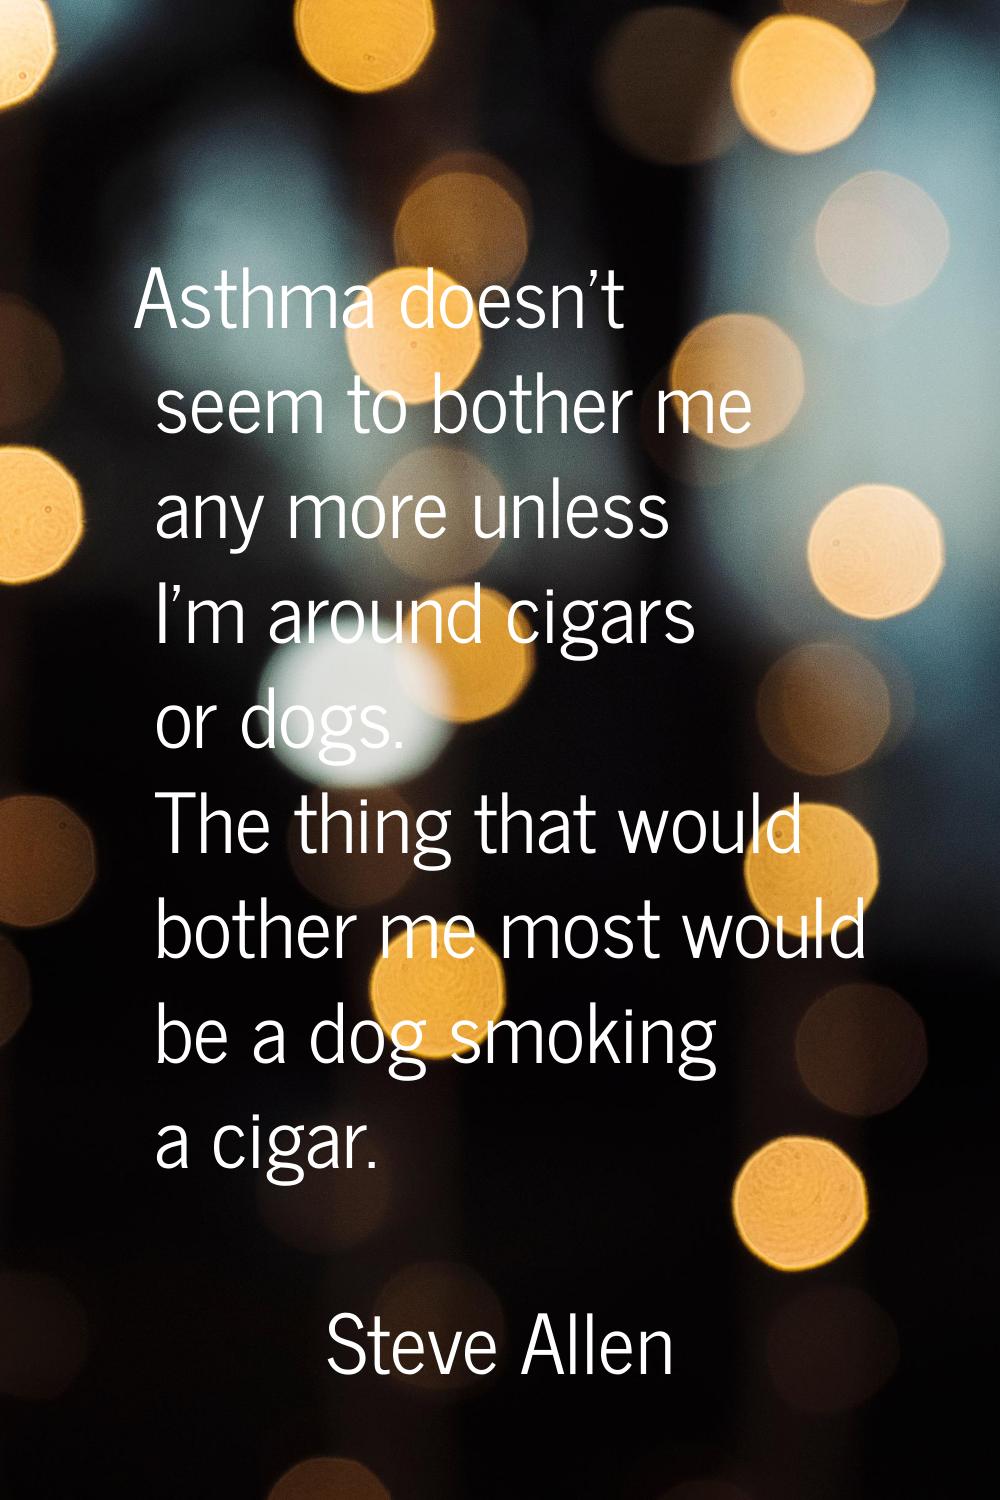 Asthma doesn't seem to bother me any more unless I'm around cigars or dogs. The thing that would bo